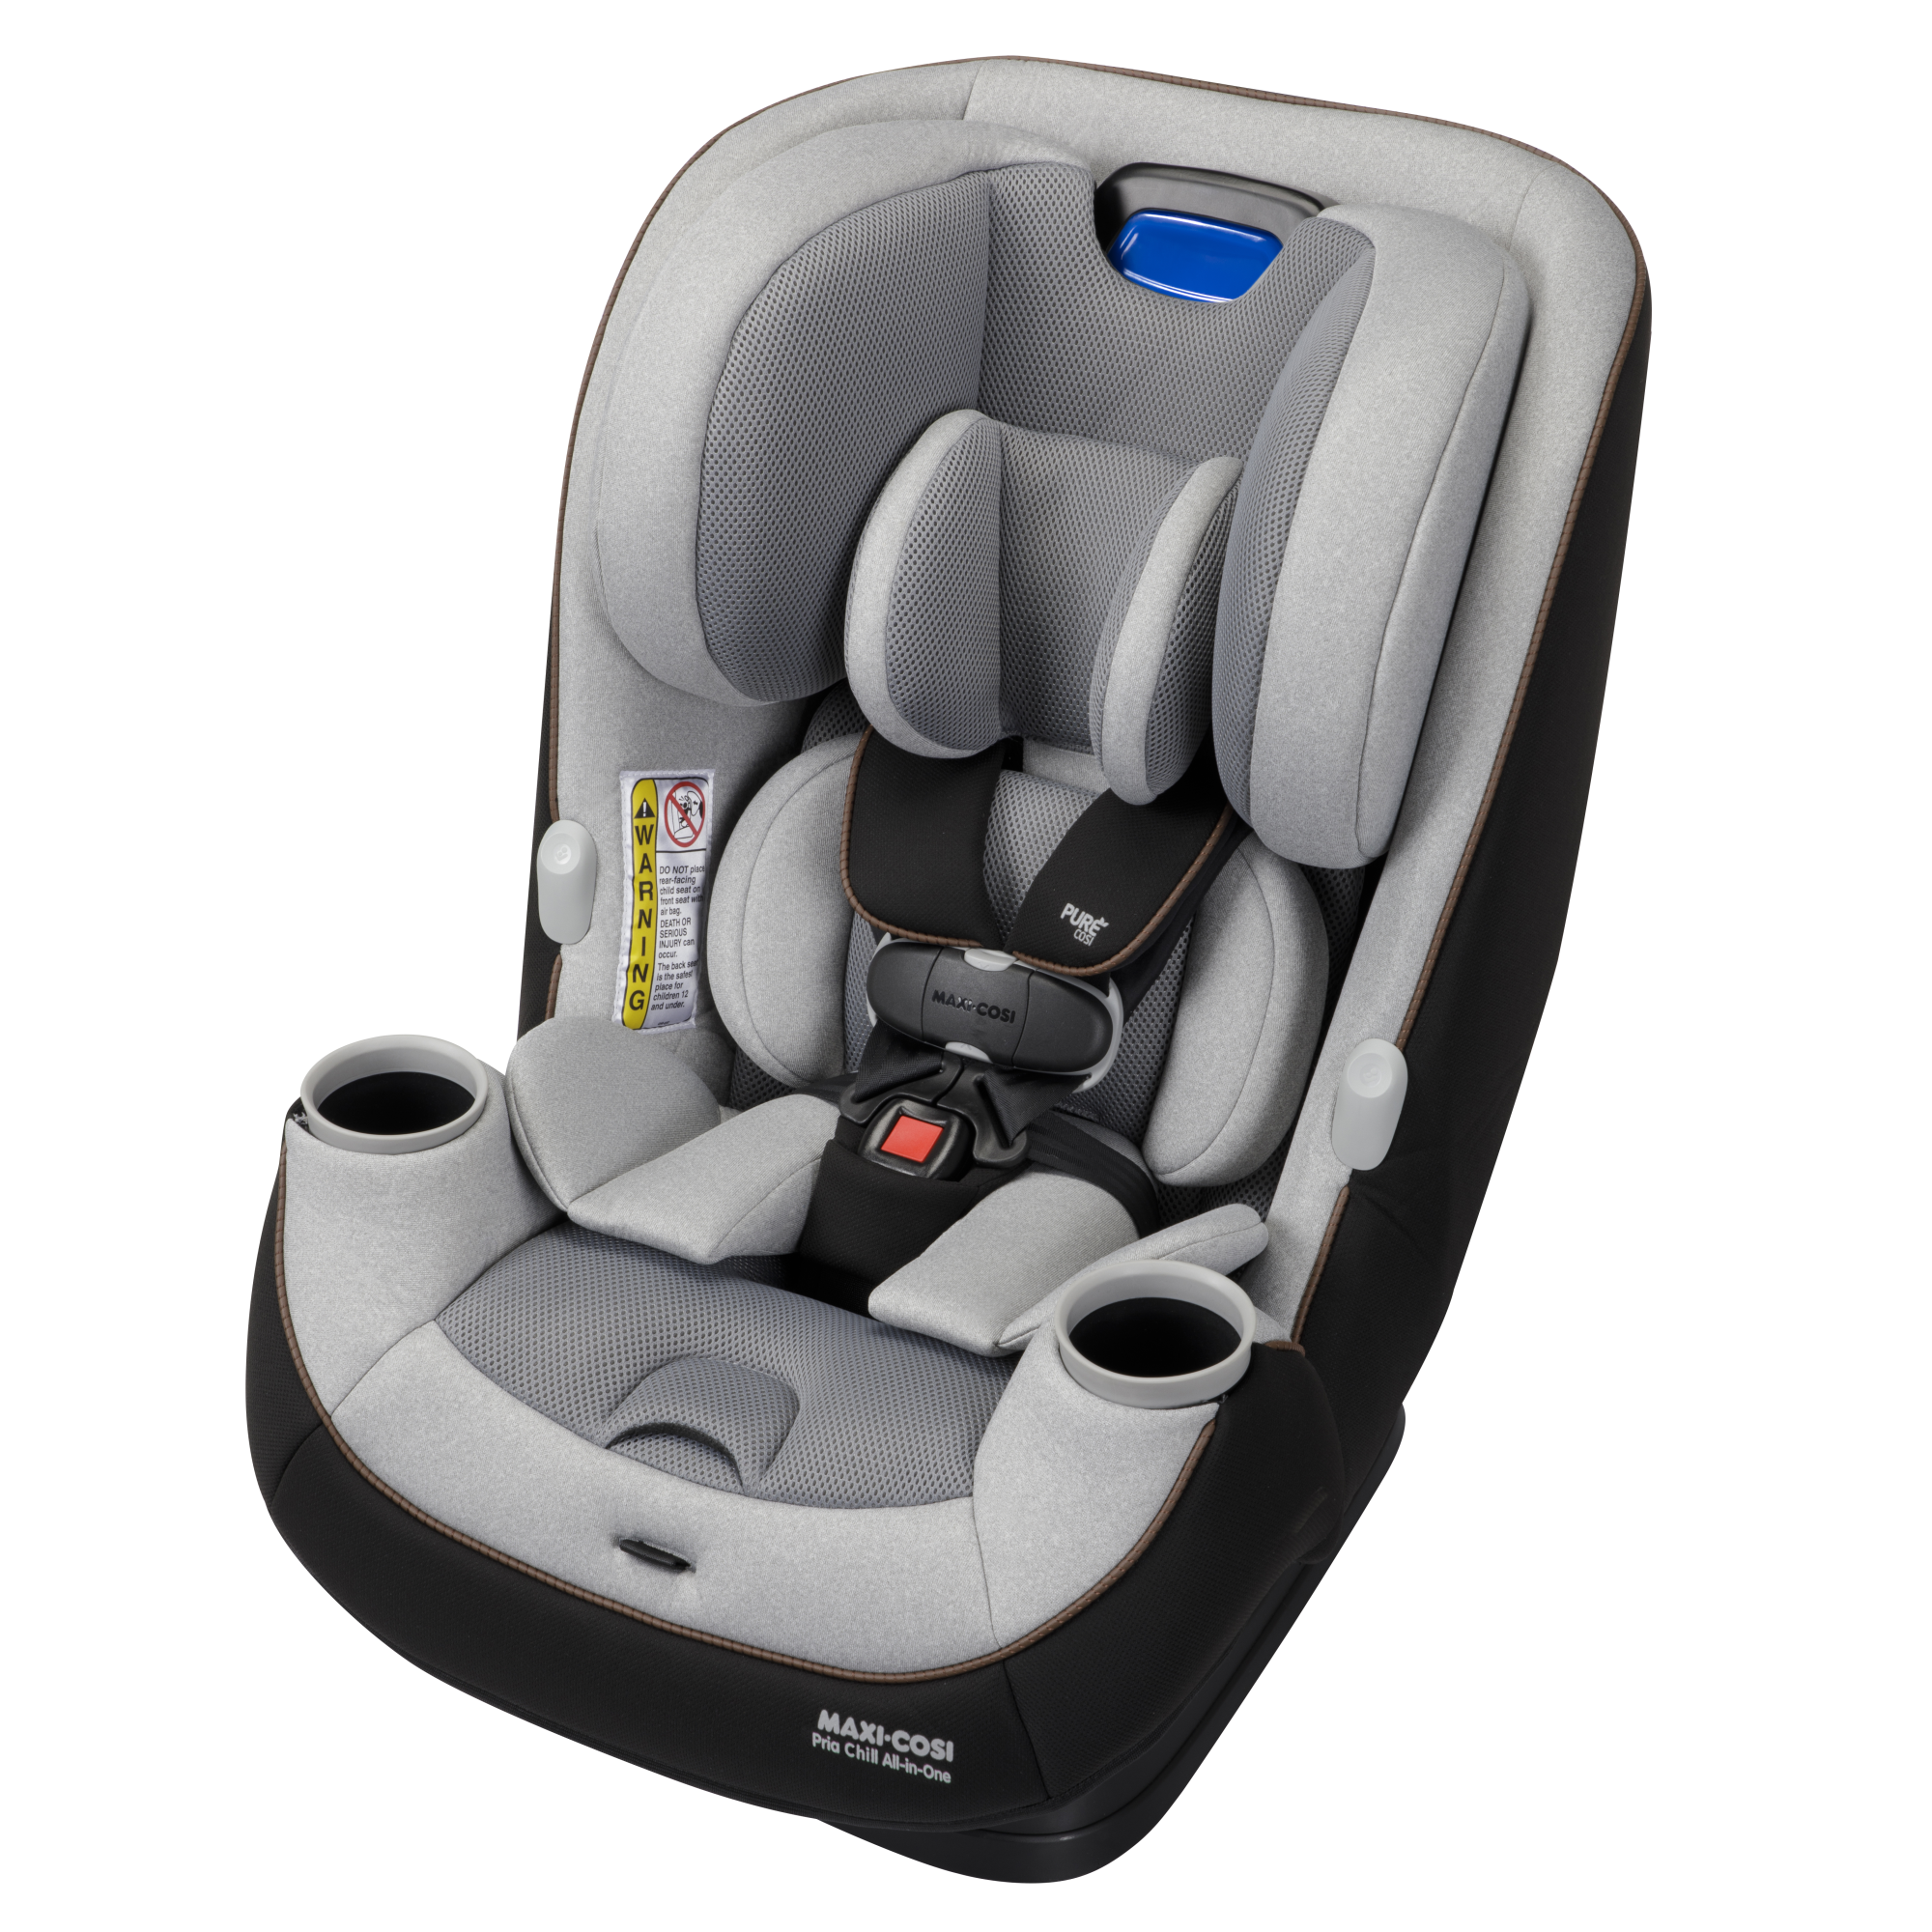 Pria™ Chill All-in-One Convertible Car Seat - 45 degree angle view